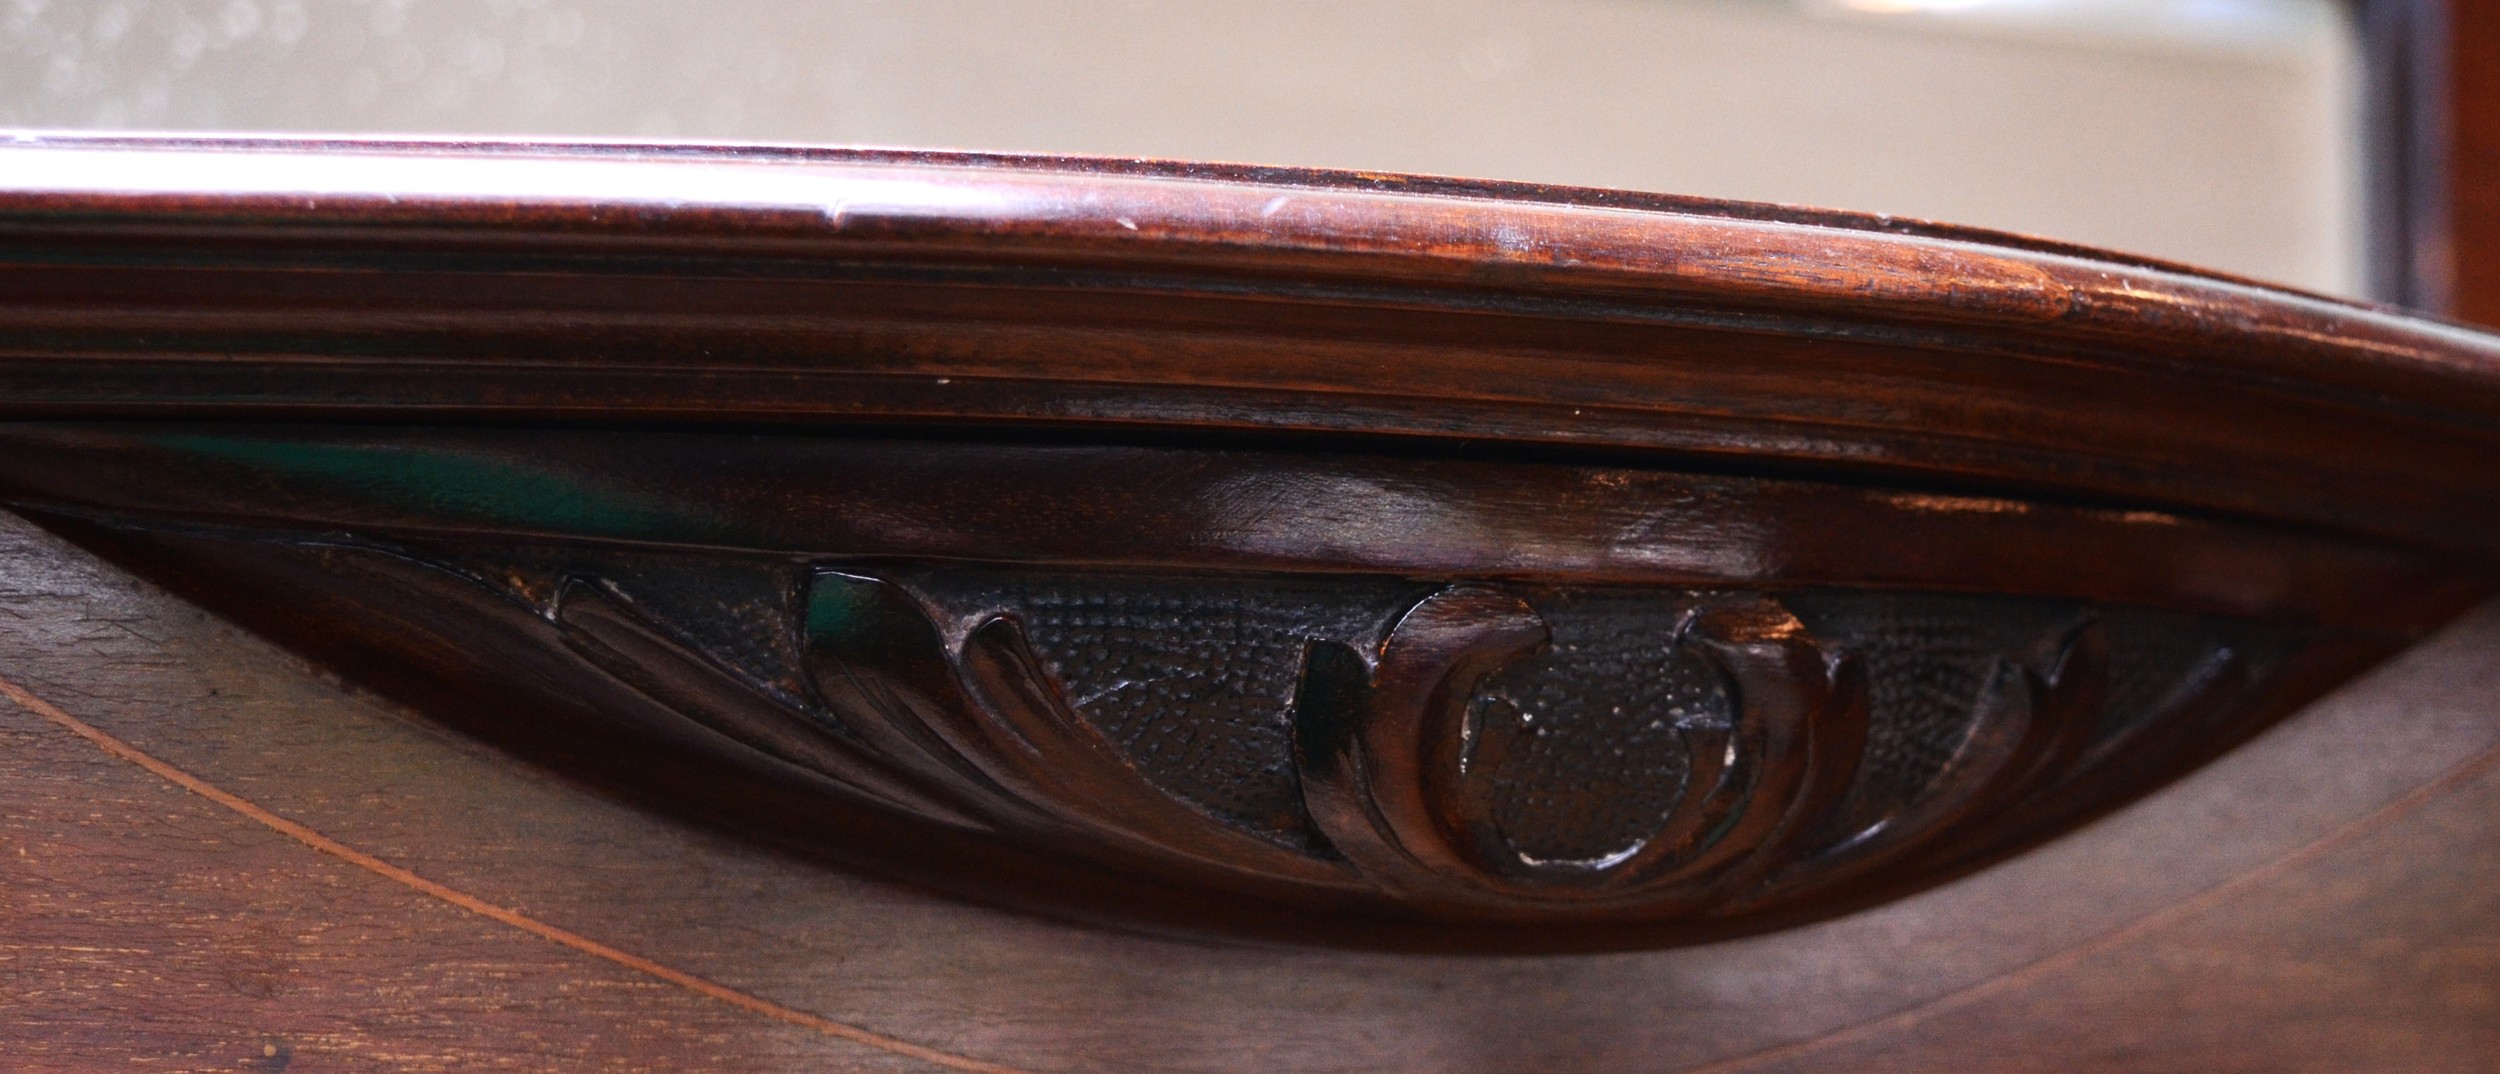 Edwardian inlaid mahogany display cabinet, the central arched mirror plate within a carved scroll - Image 4 of 5